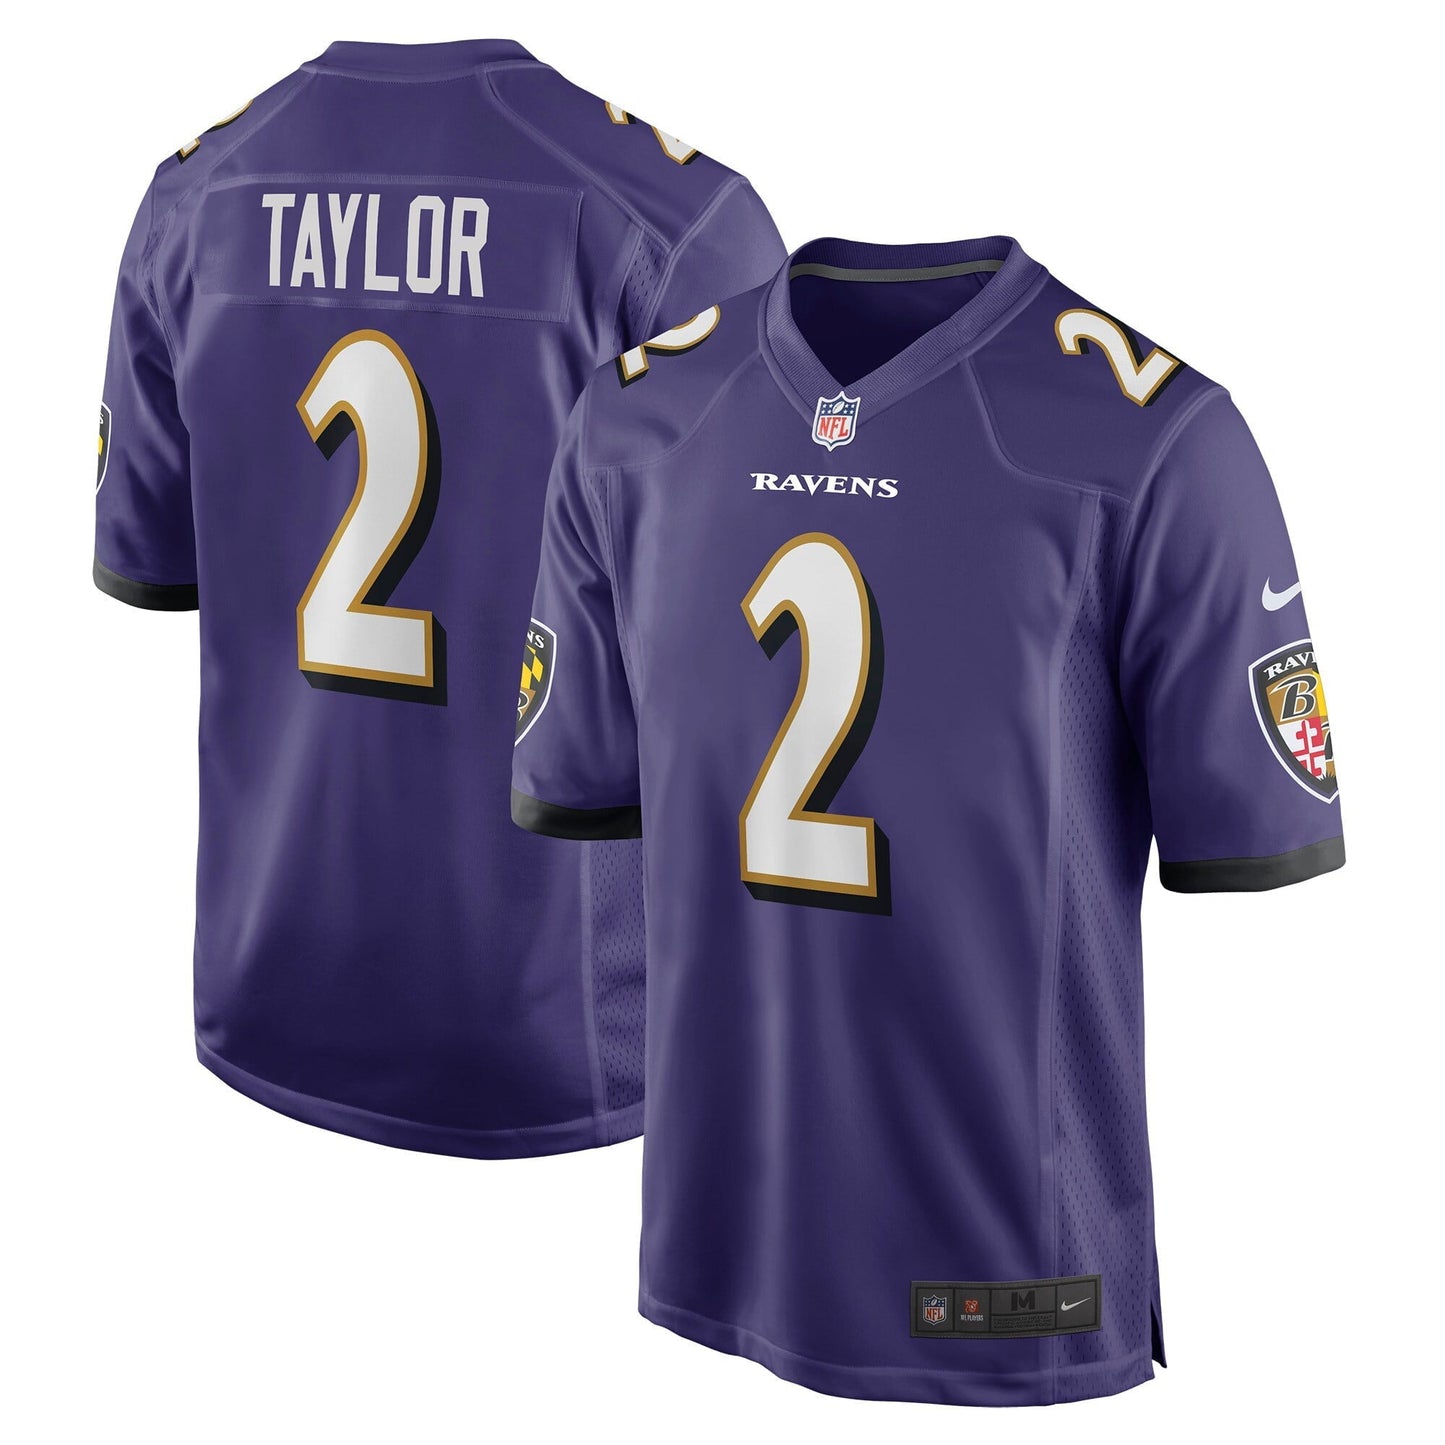 Nike Youth Baltimore Ravens Tyrod Taylor Team Color Game Jersey